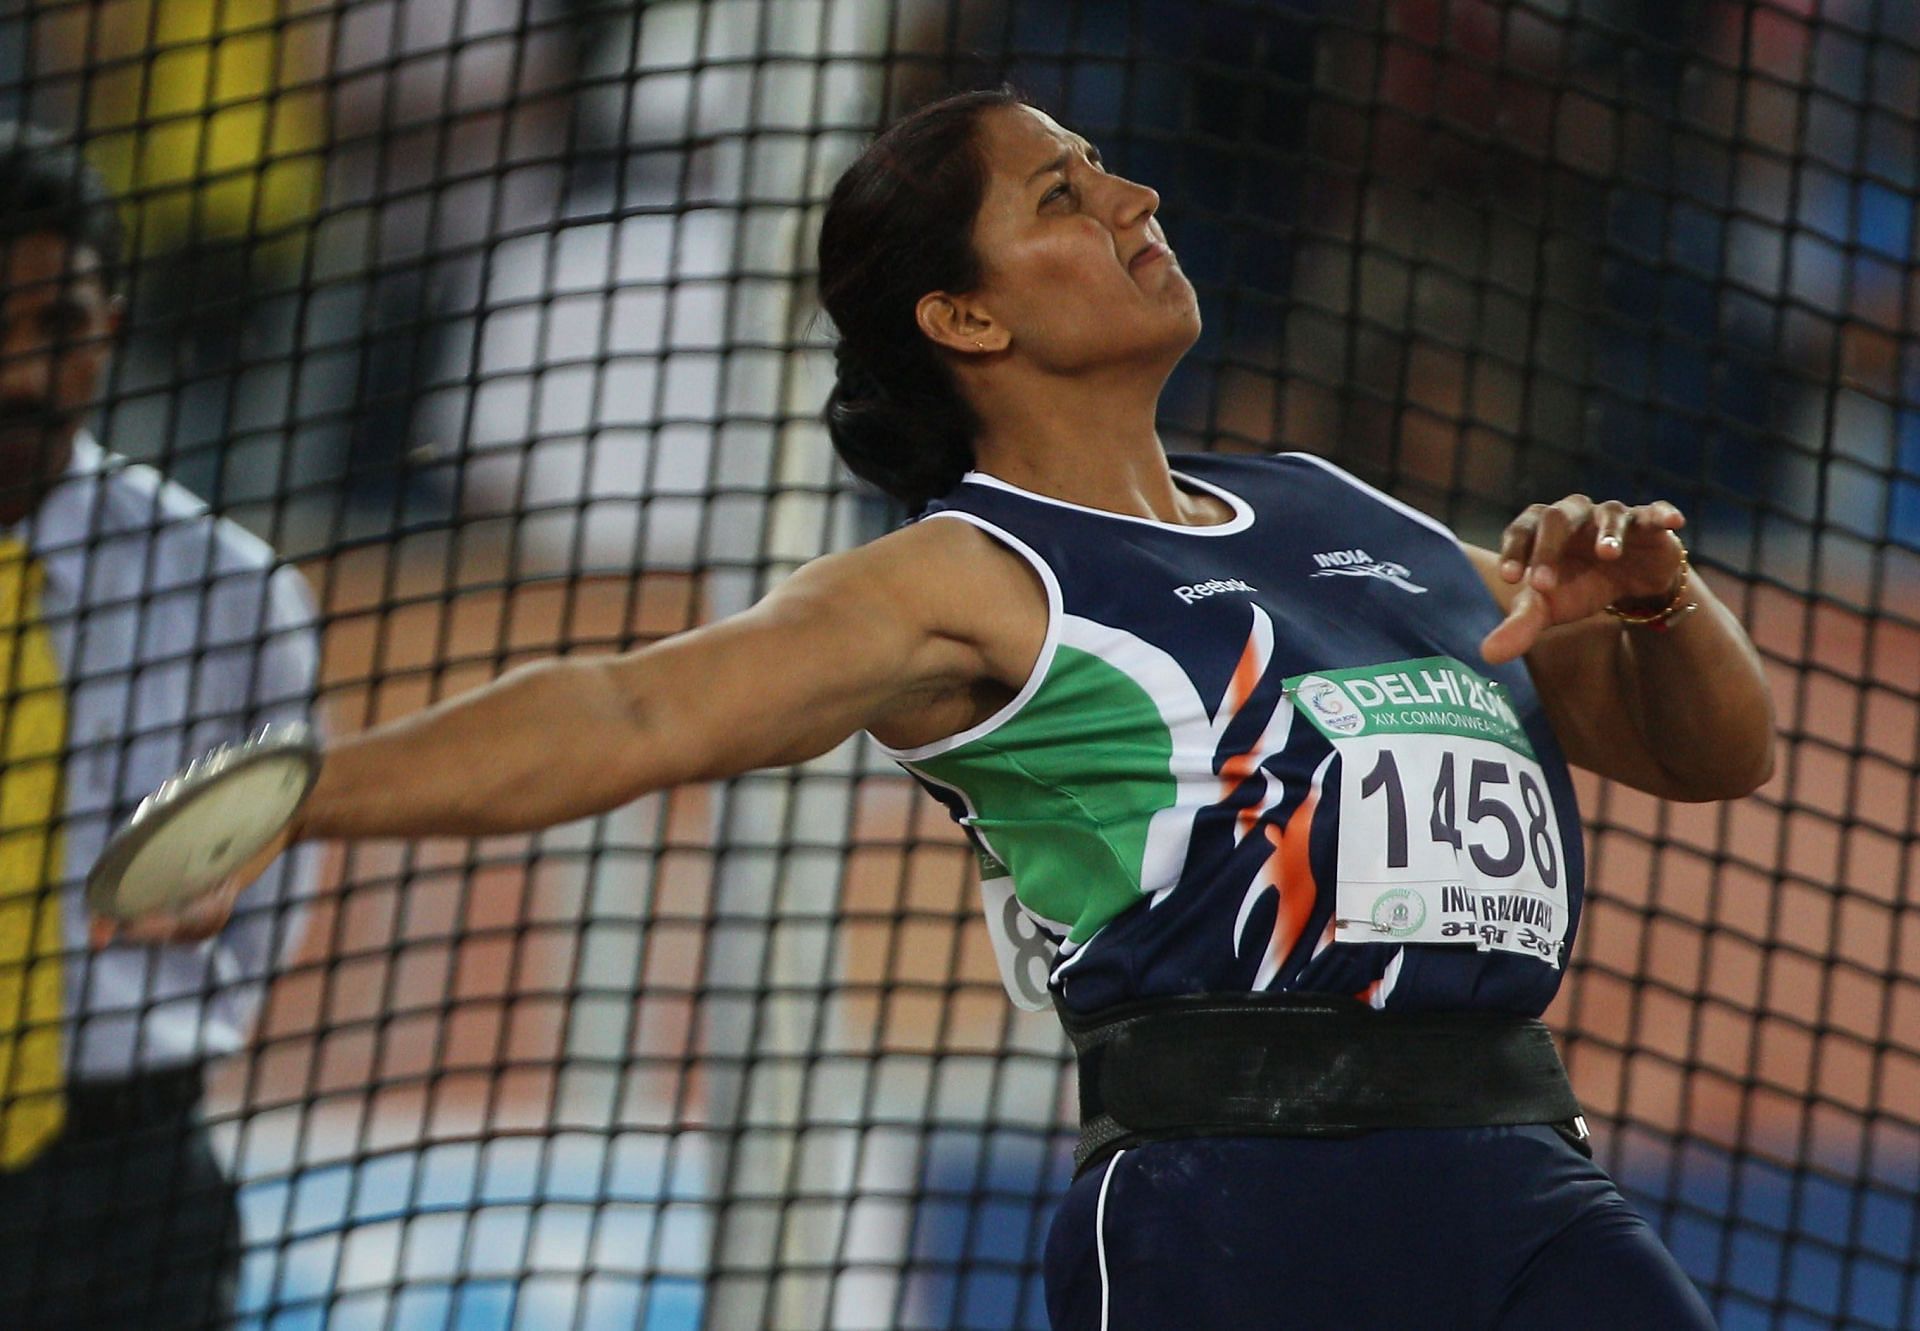 Krishna Poonia created history at the 2010 CWG. (Image courtesy: Getty)